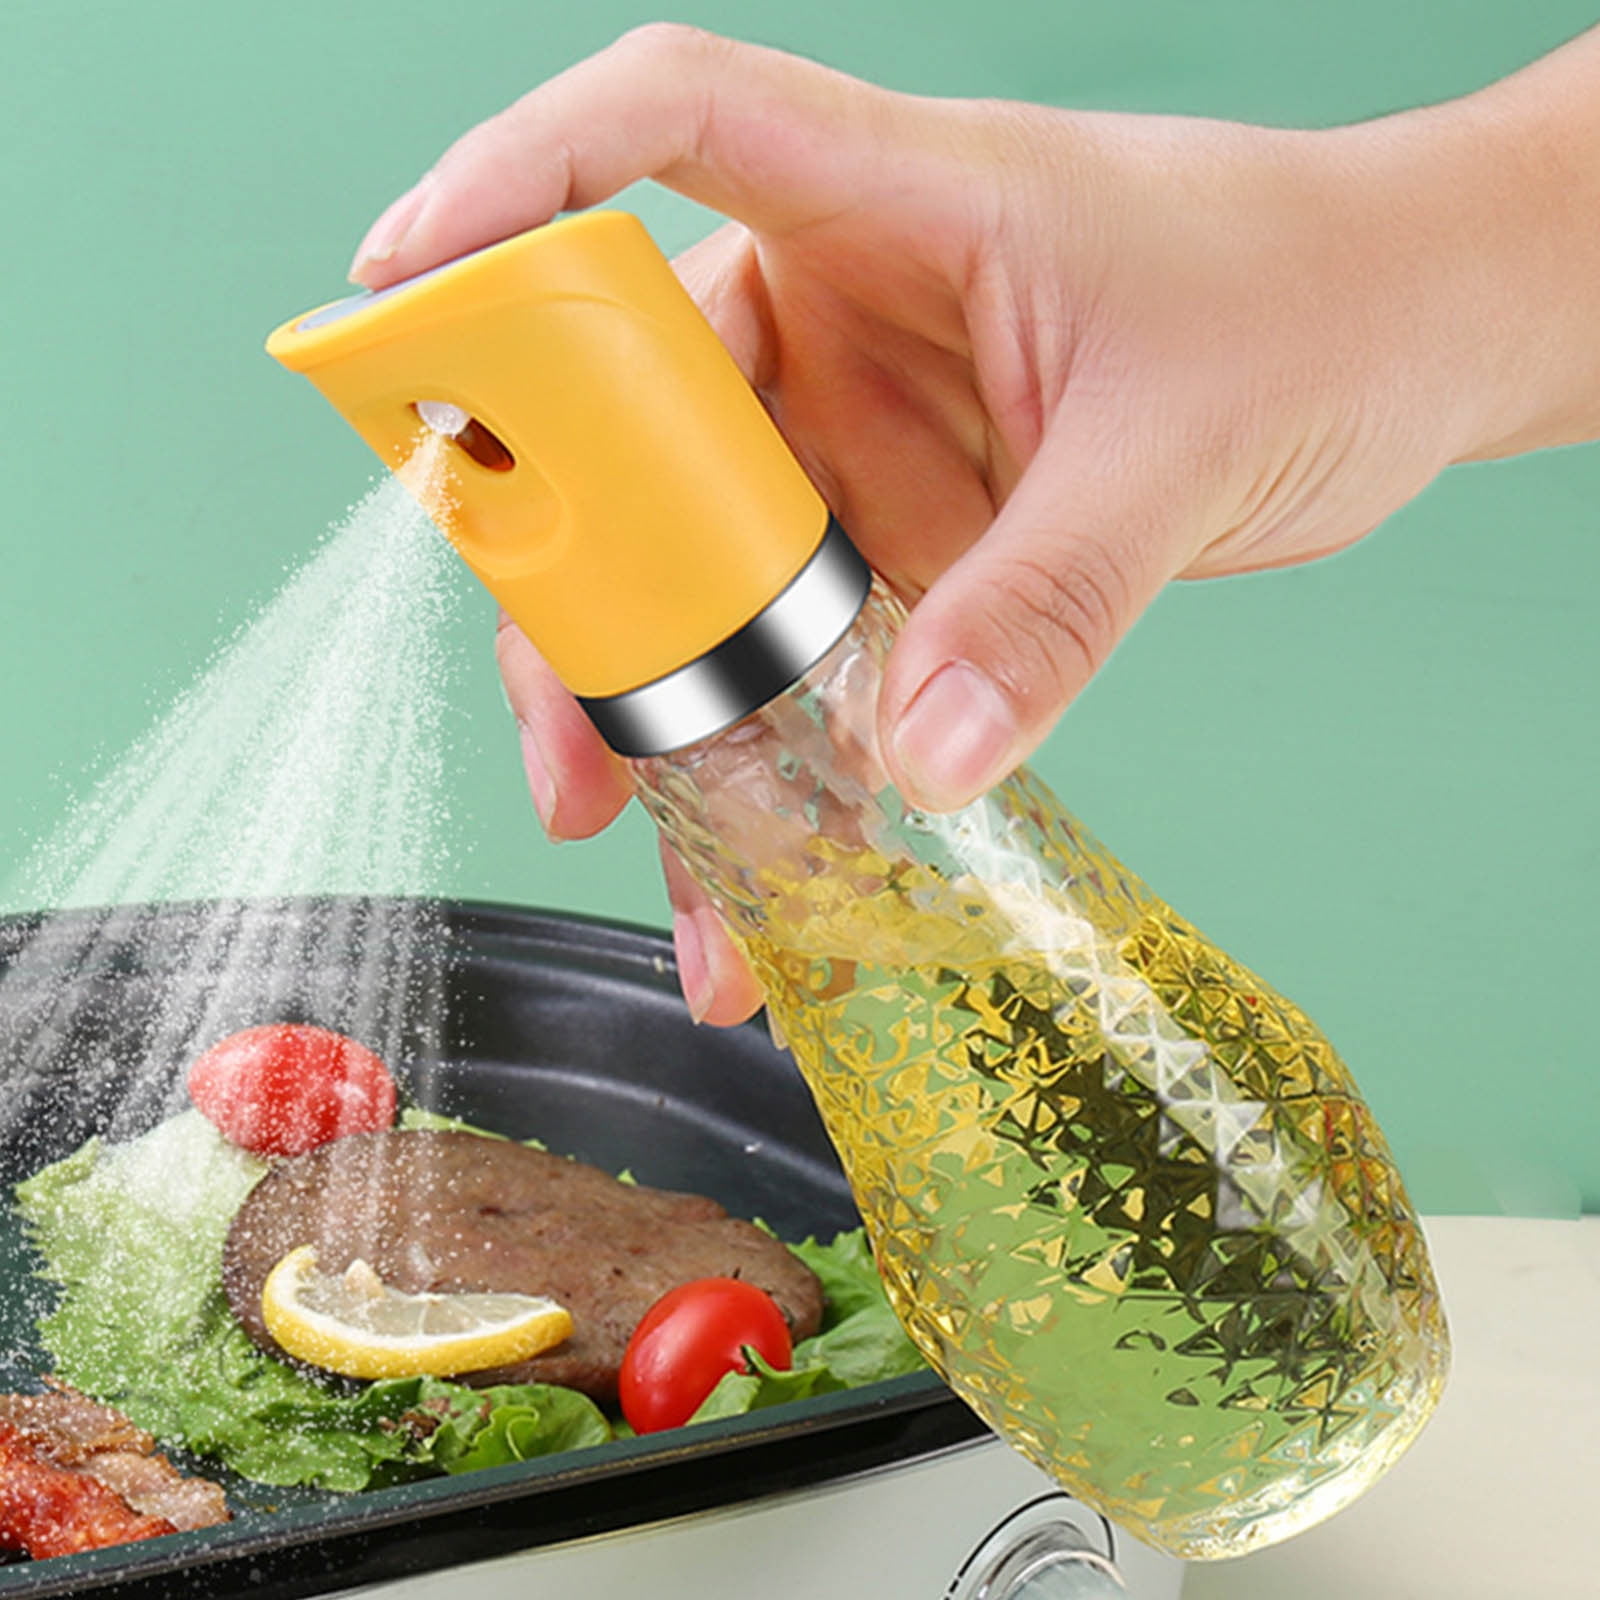 EJWQWQE Oil Sprayer For Cooking Olive Oil Sprayer 260ml Glass Olive Oil  Spray Bottle Kitchen Gadgets Accessories For Fryer